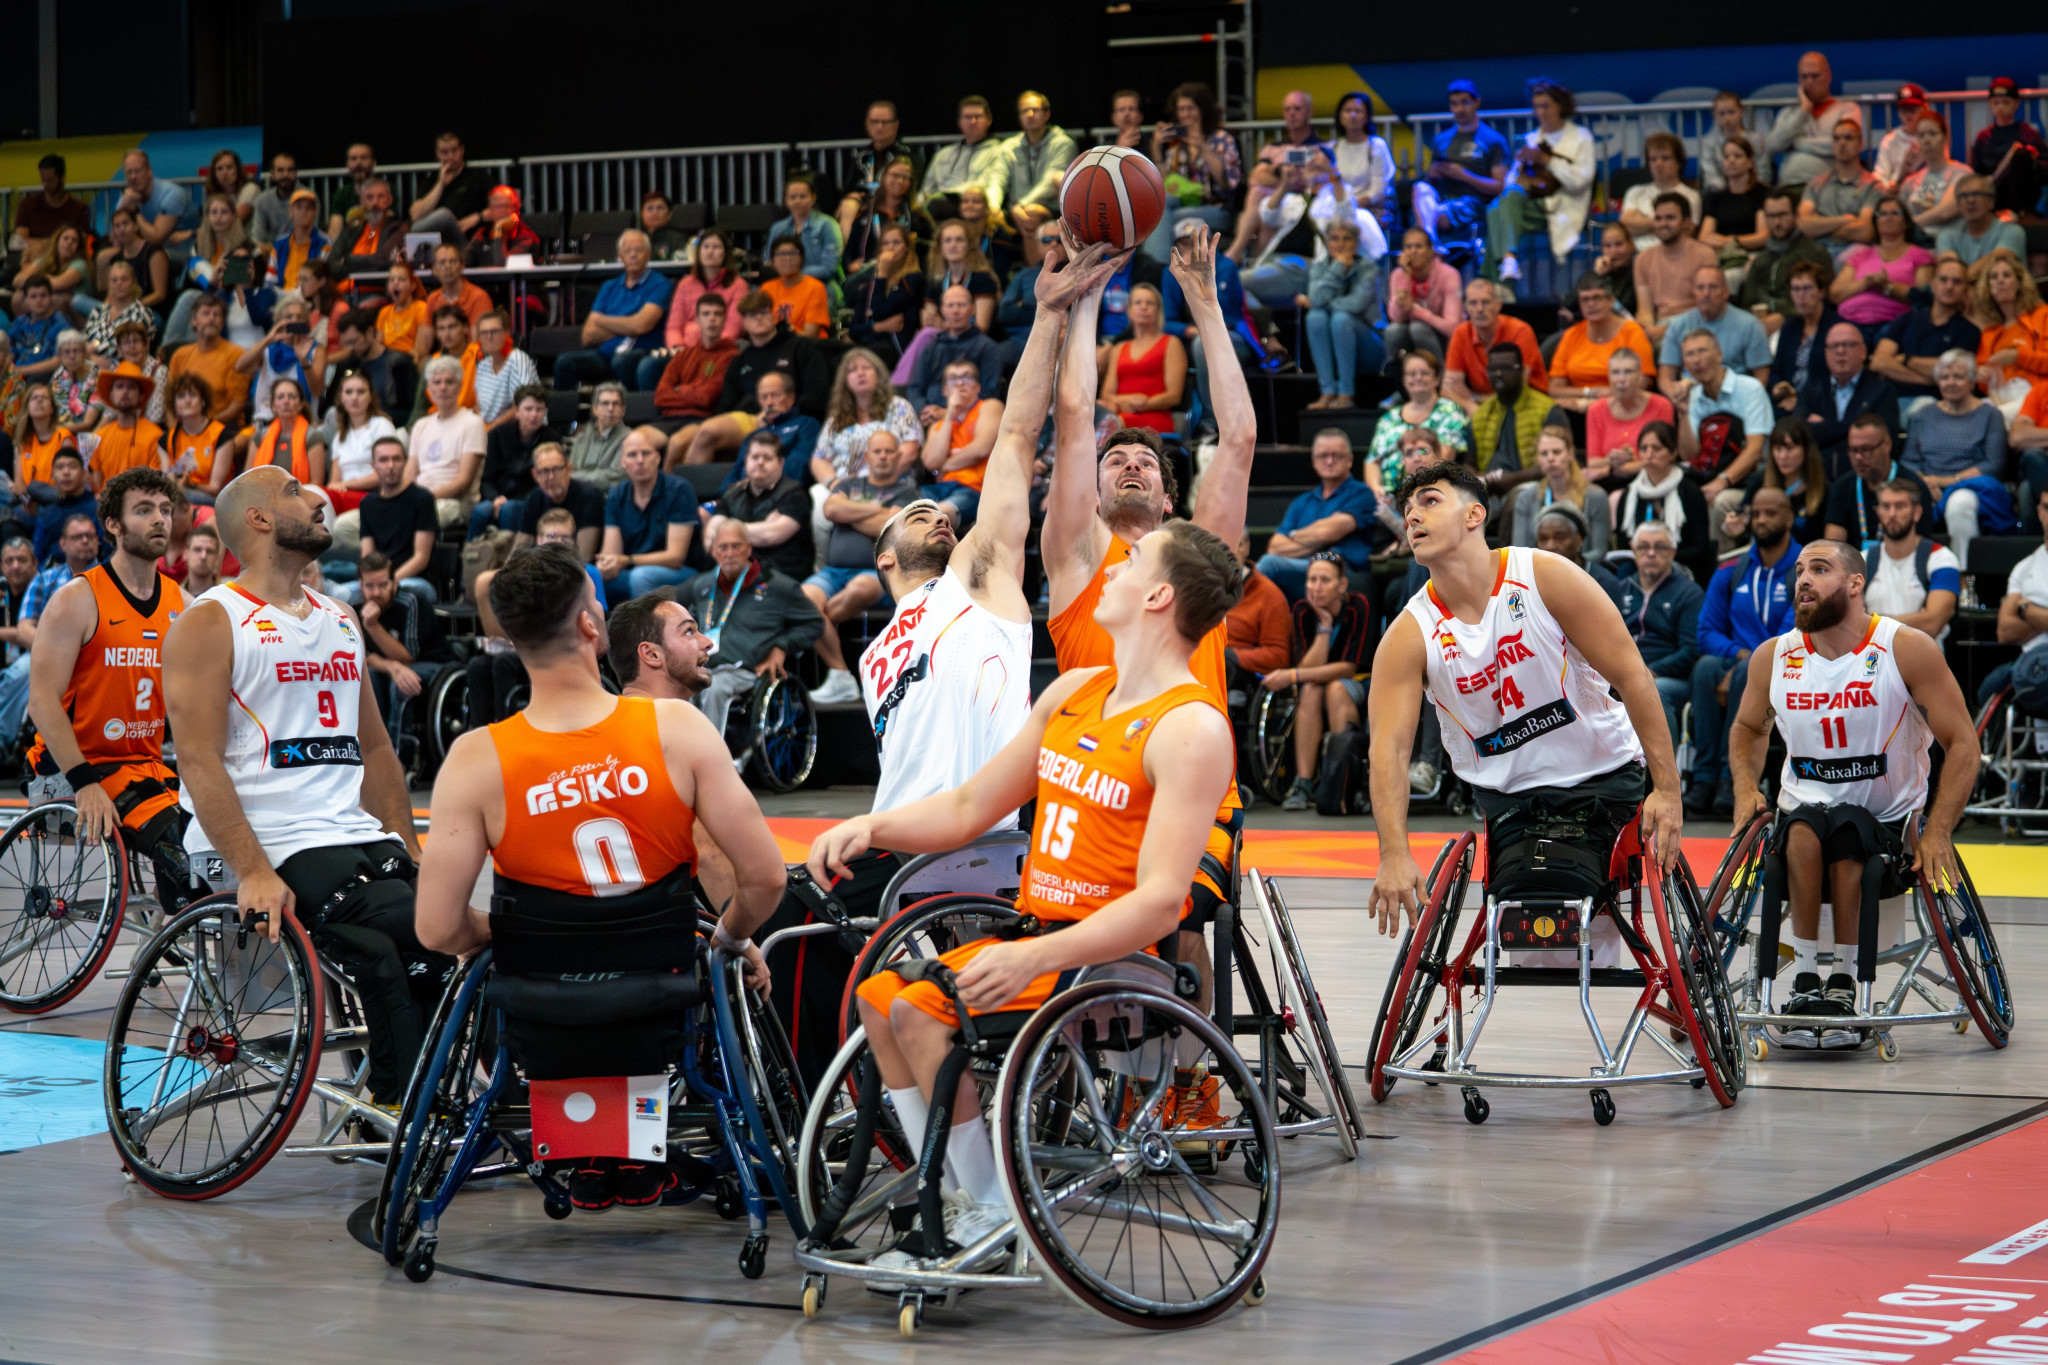 The Netherlands have high hopes of wheelchair basketball success in Rotterdam with the home fans behind them ©EPC